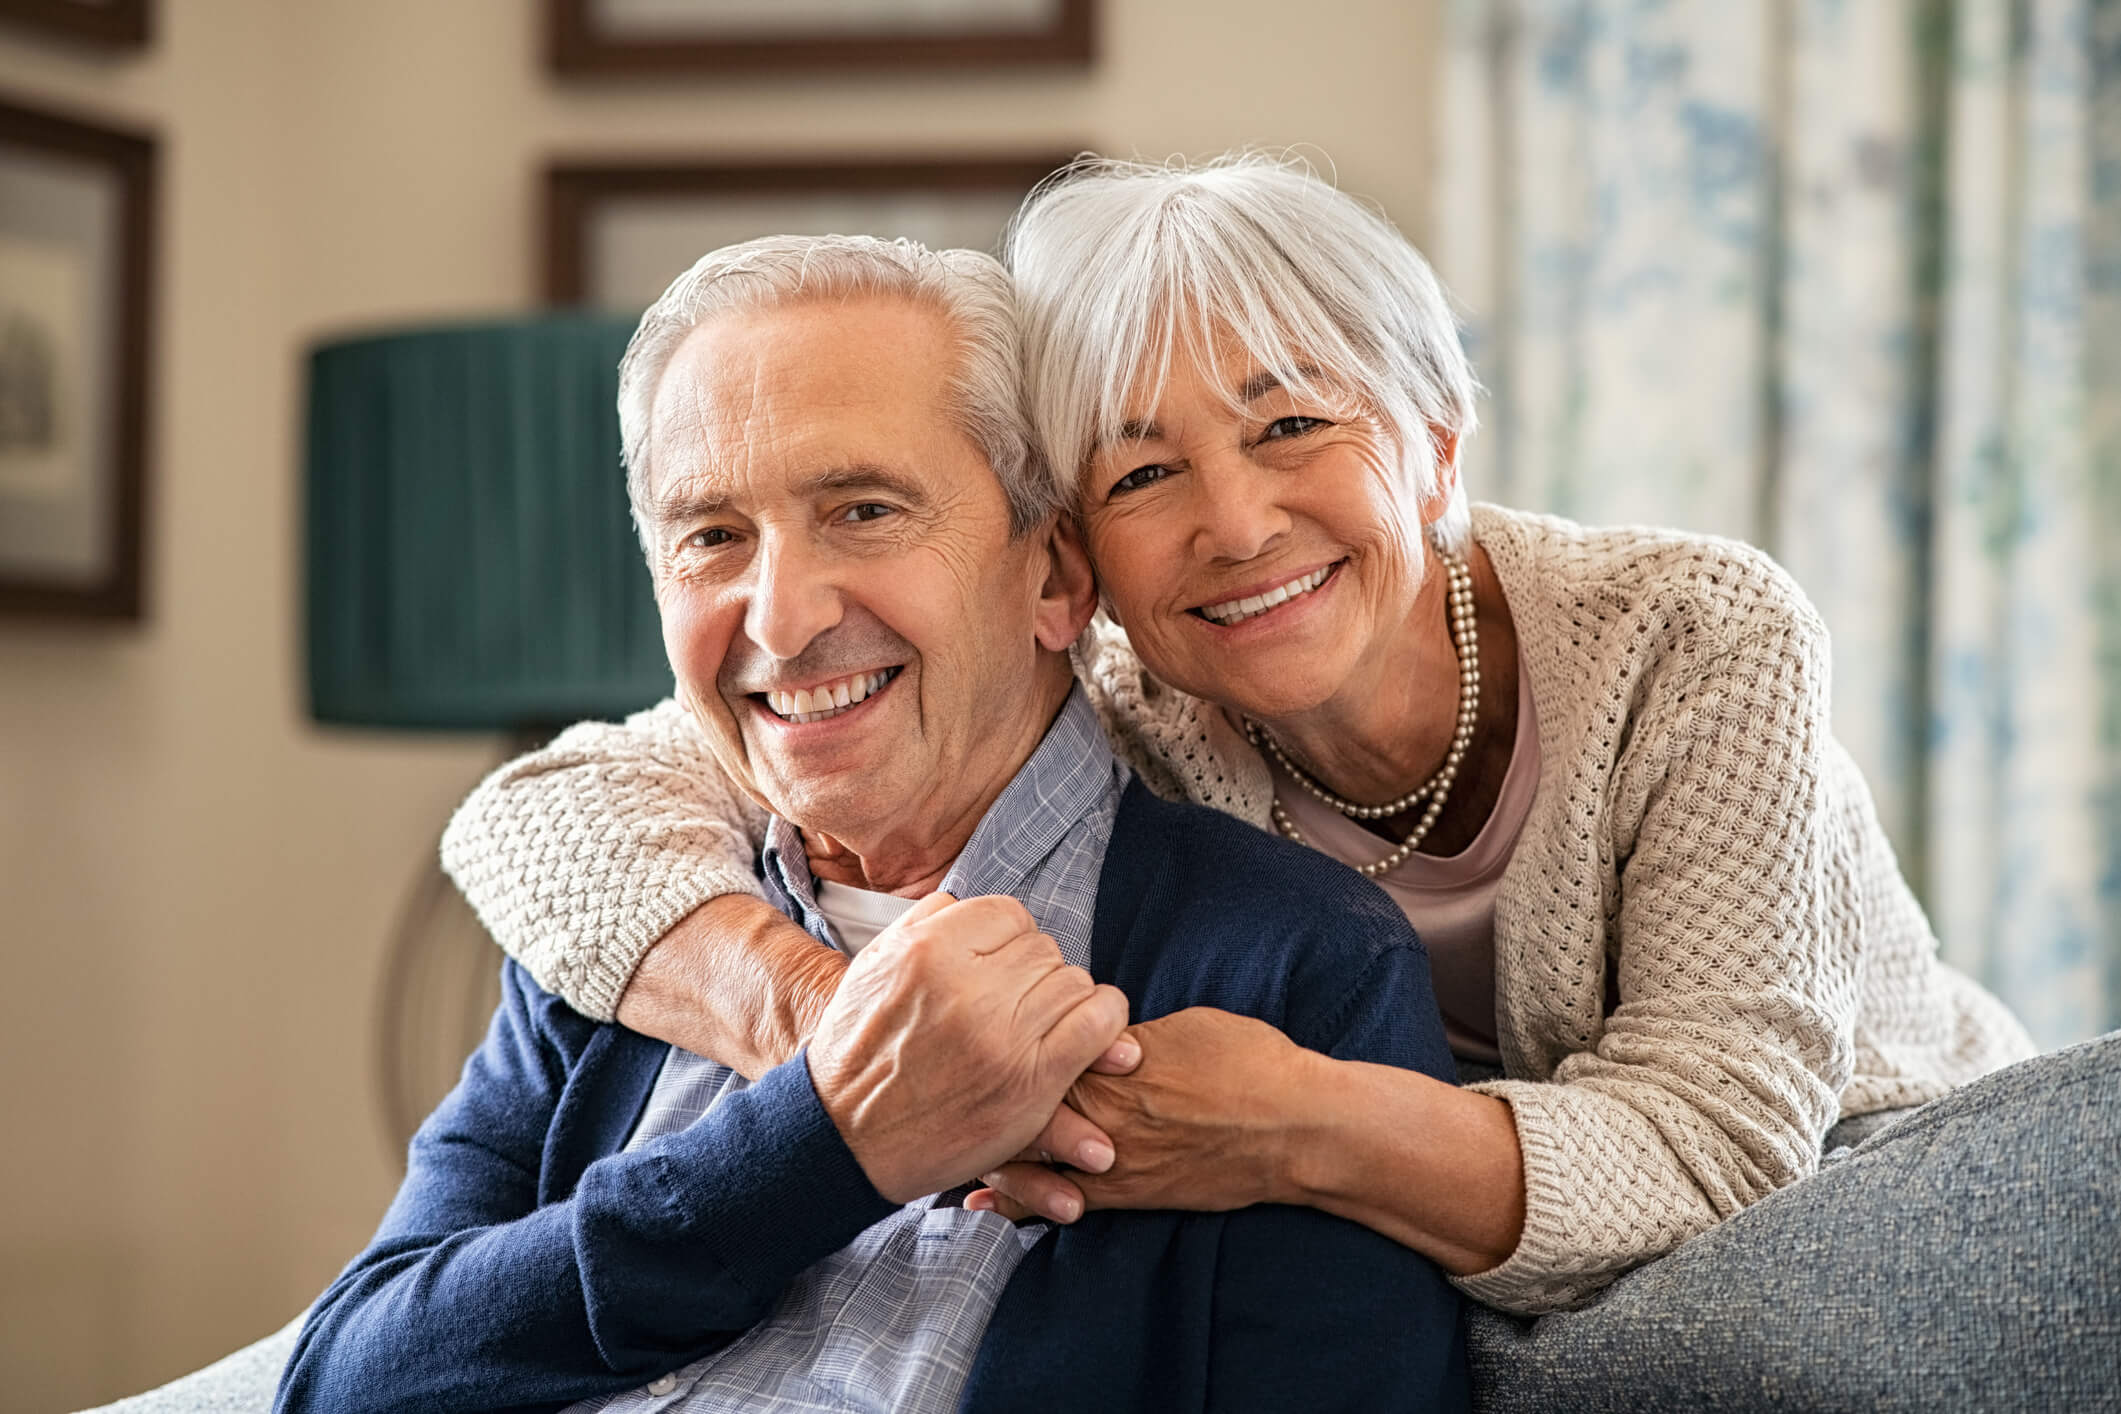 Elderly couple smiling side by side while sitting down.